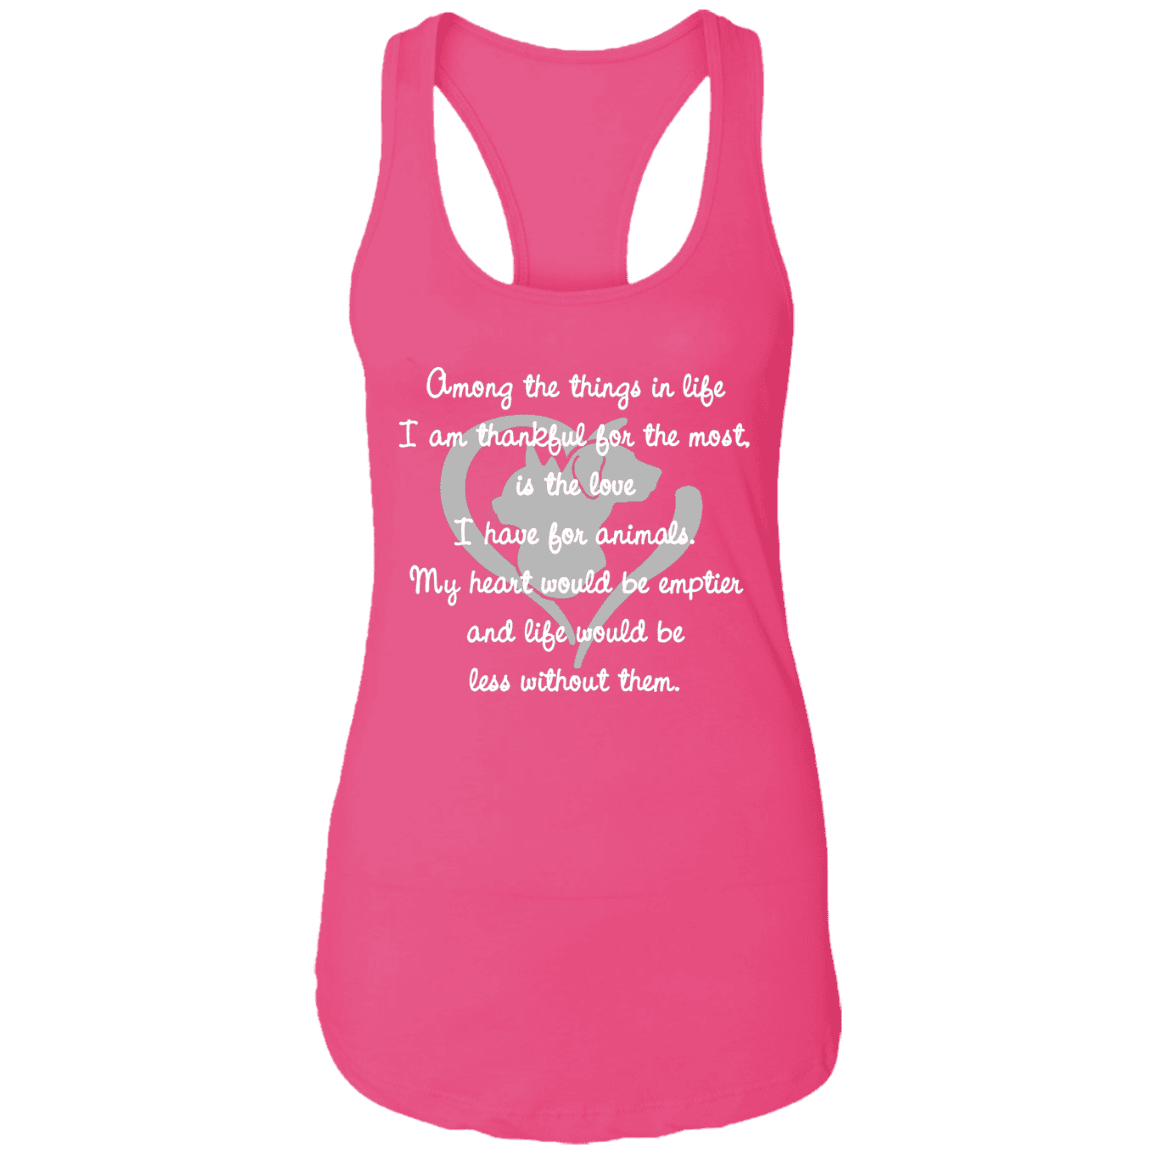 Among The Things In Life - Ladies Racer Back Tank.